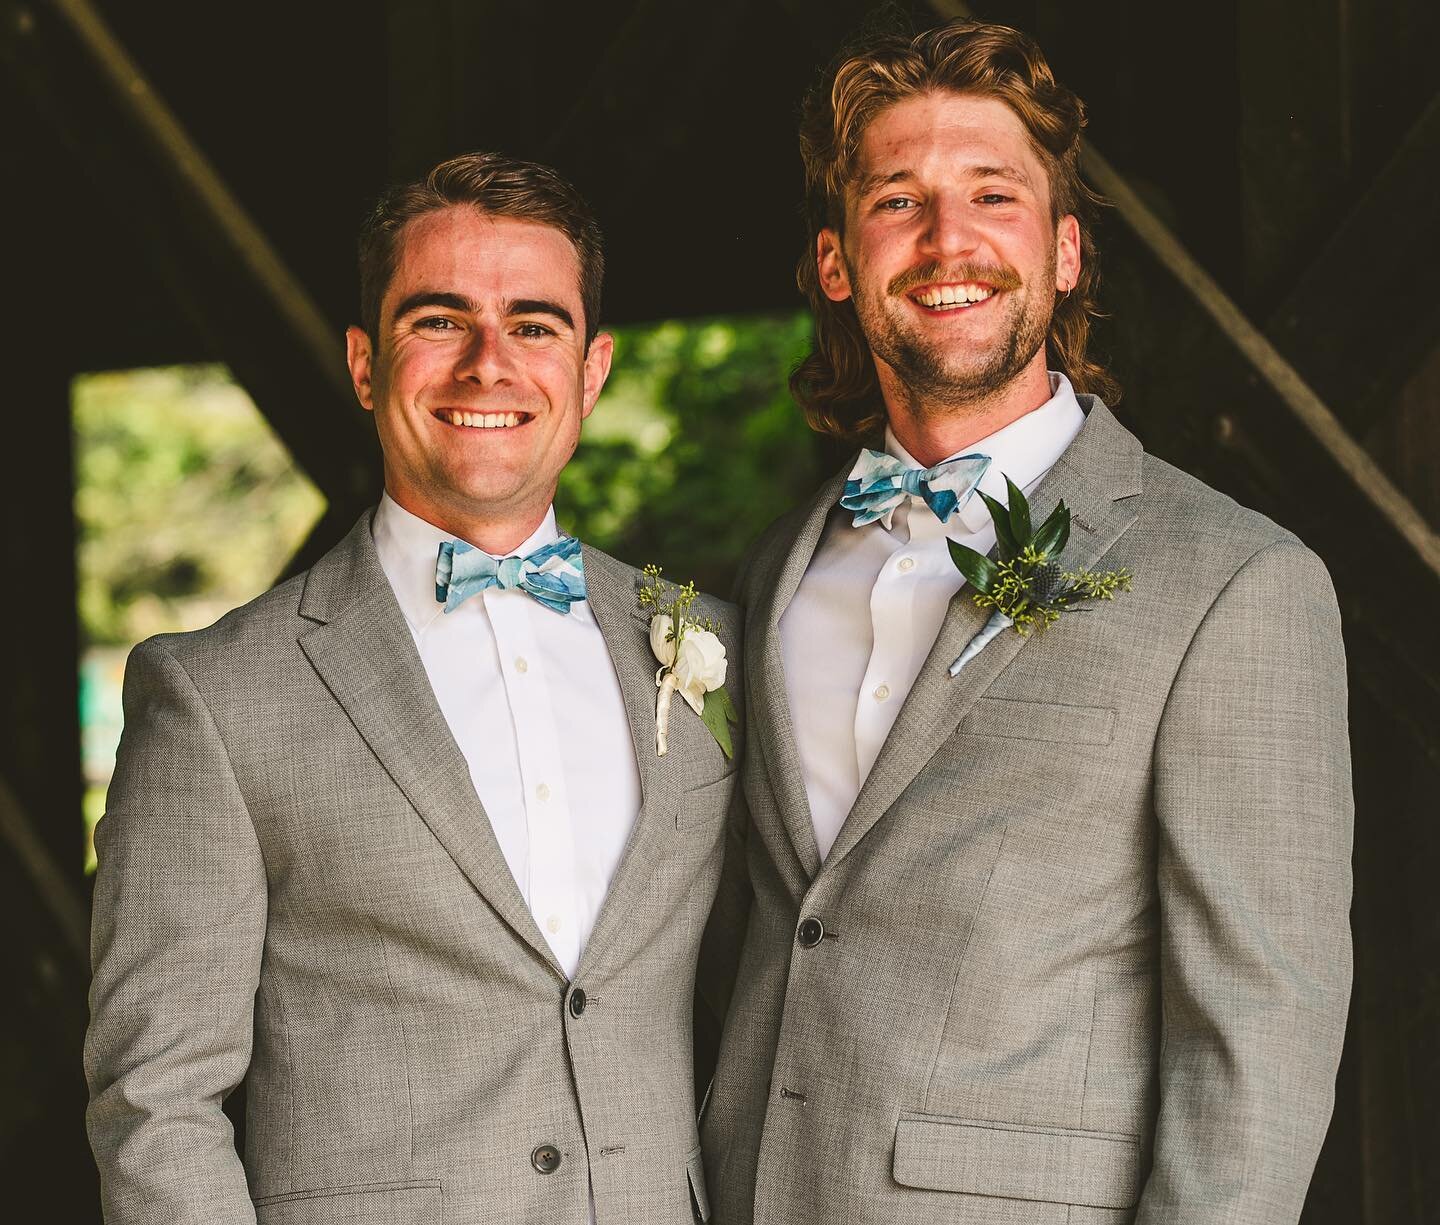 Conor + Carl 4evr. Back on my summer wedding posting grind. Much love to a happy couple and a whole lot of happy people